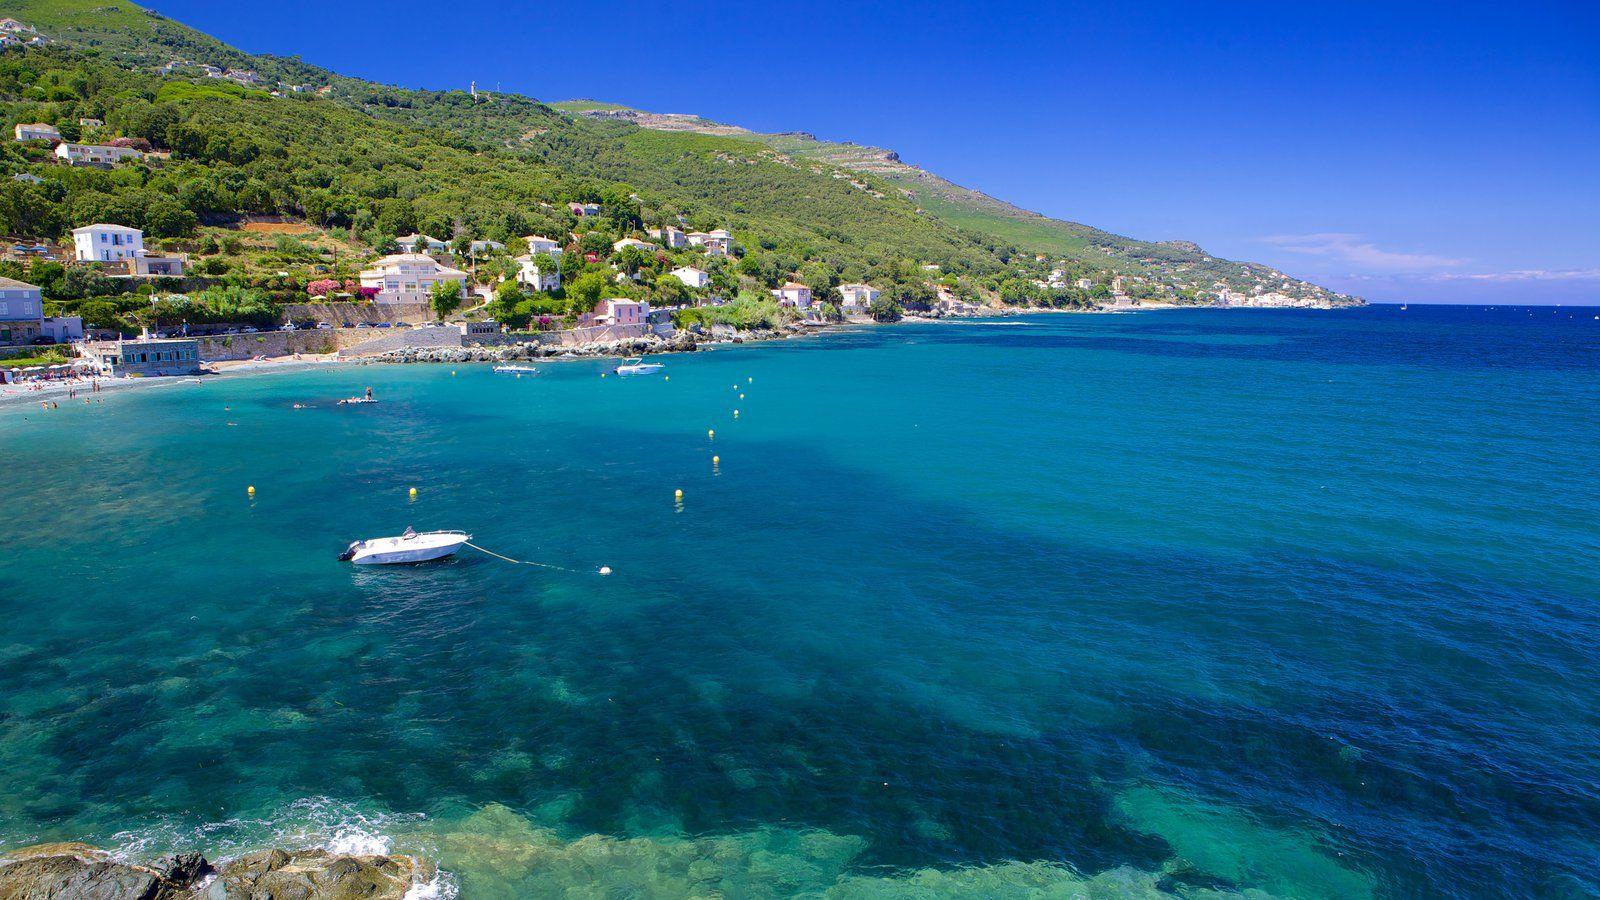 Northern Corsica Picture: View Photo & Image of Northern Corsica